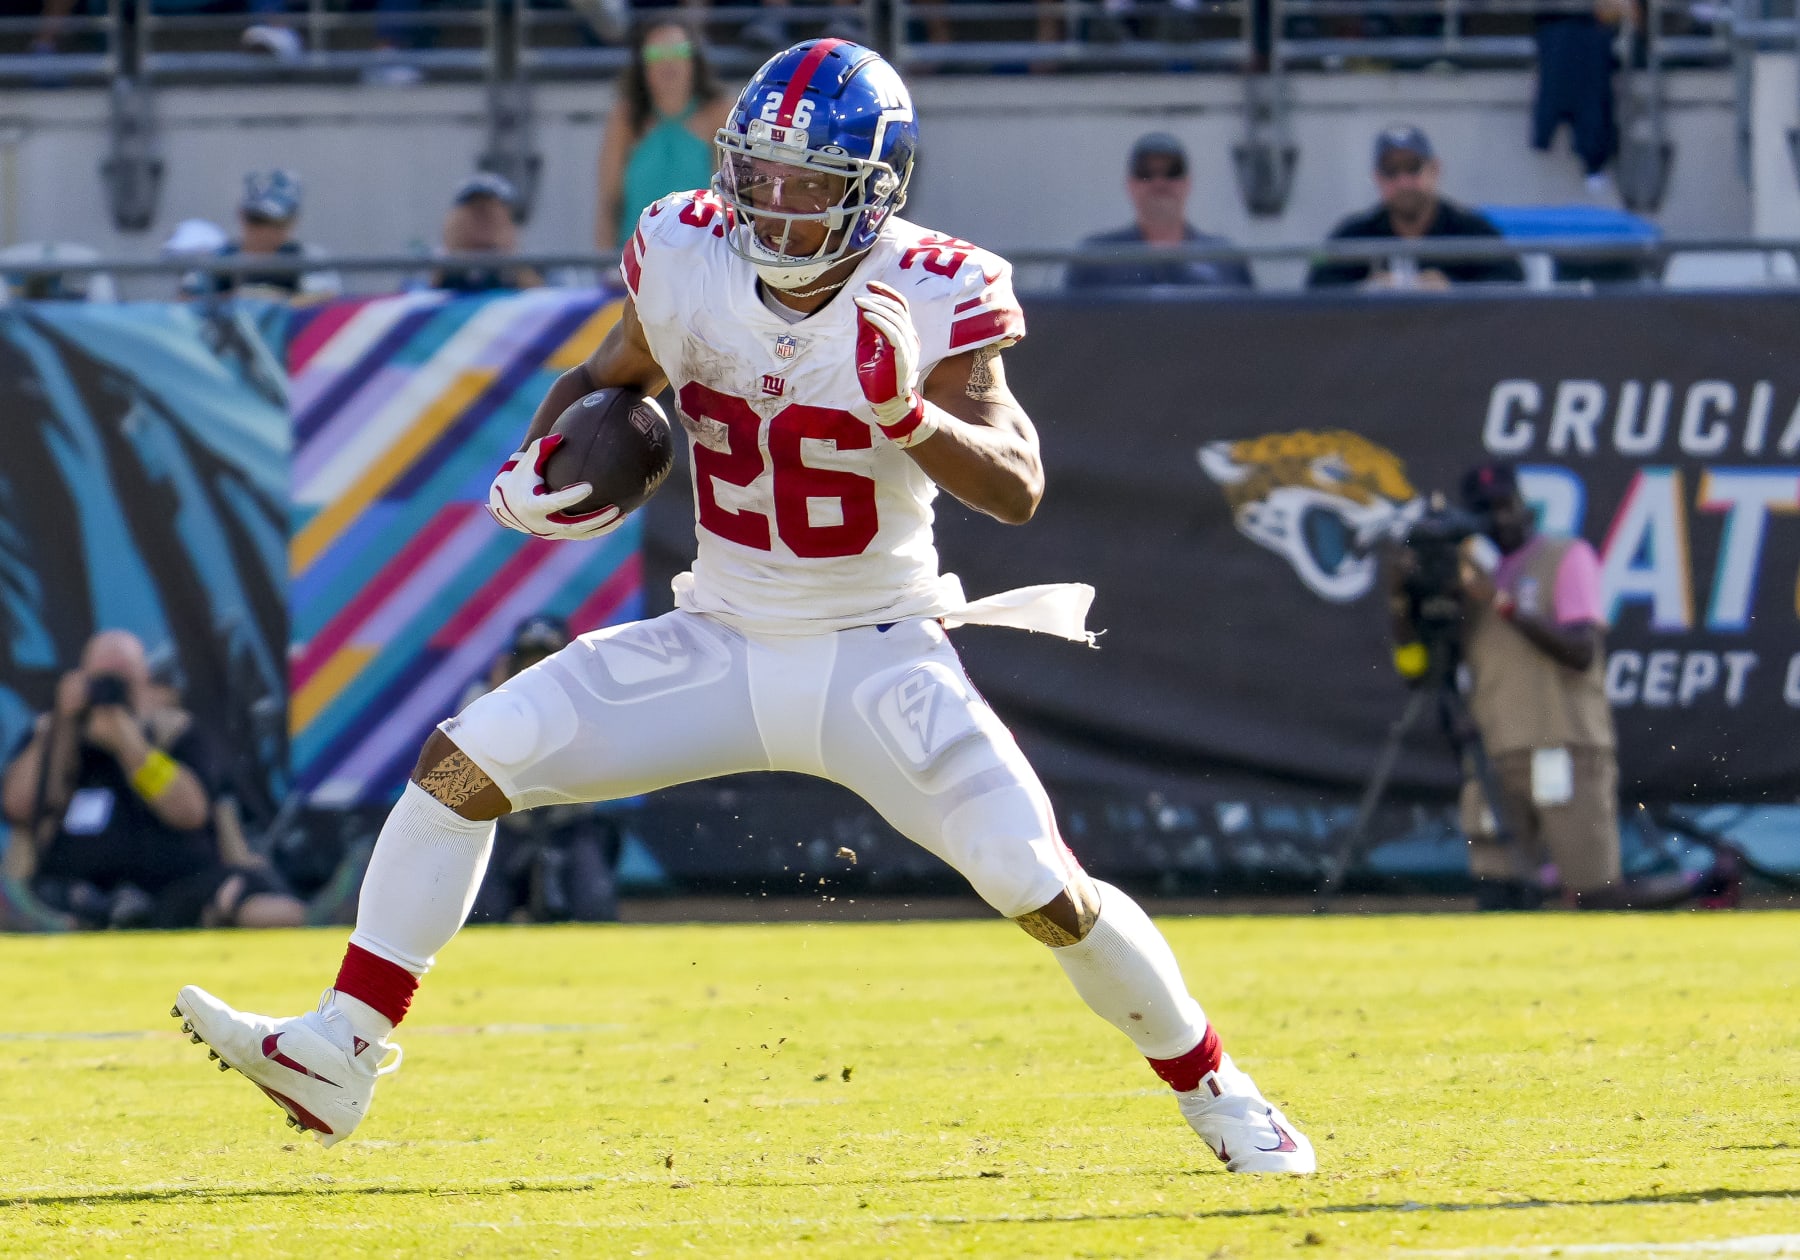 Giants at Jaguars 2022, Week 7: Everything you need to know - Big Blue View